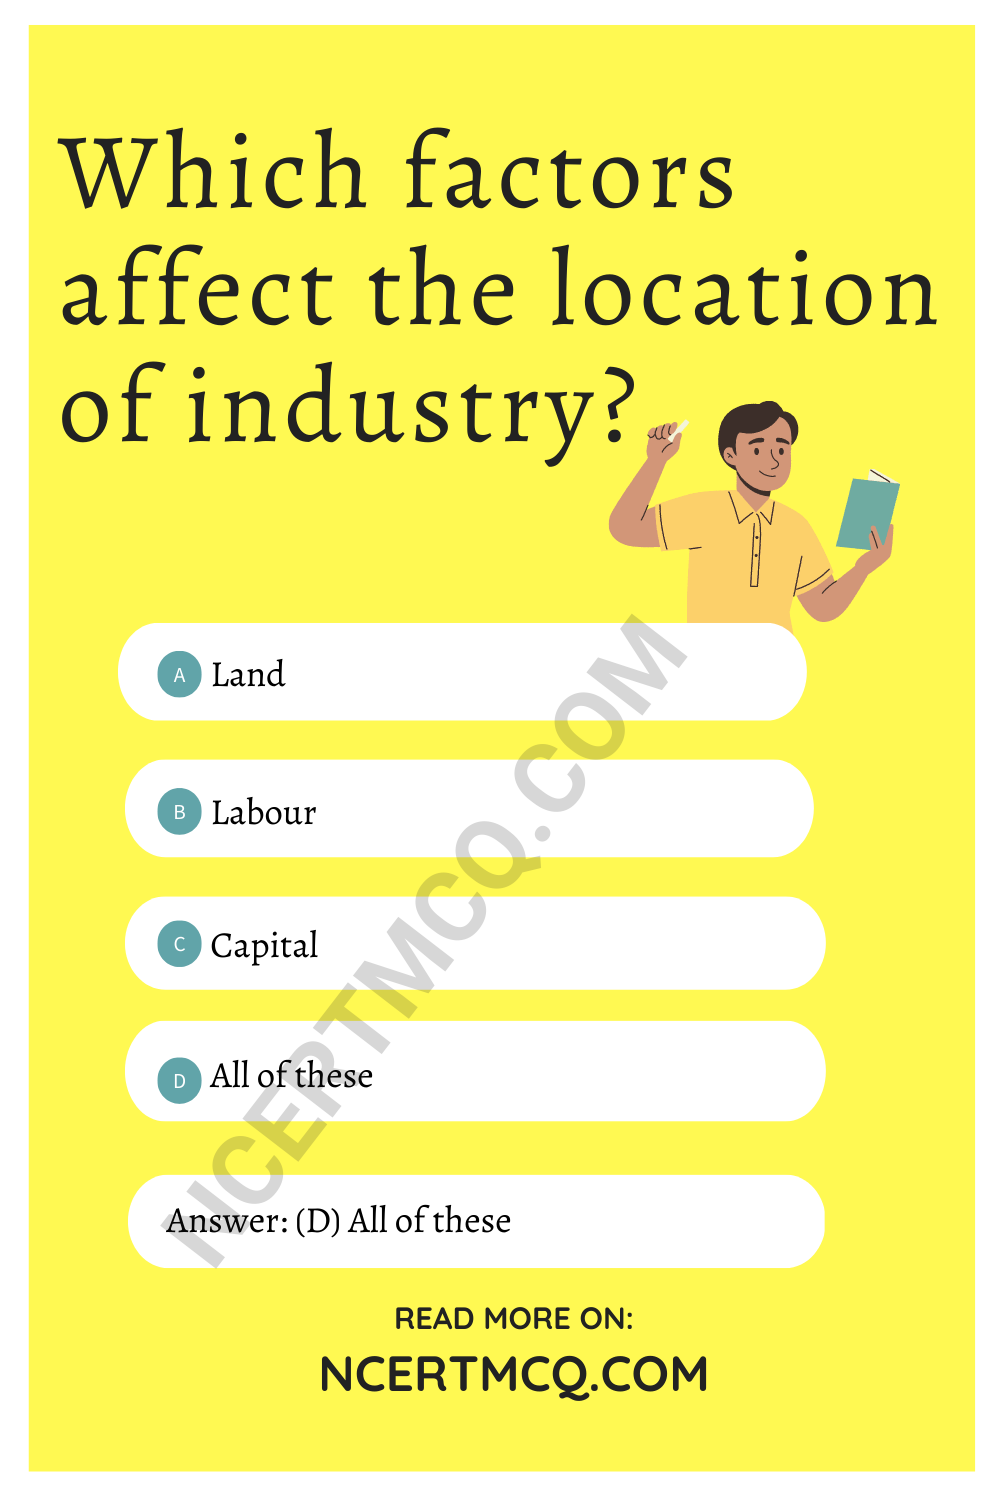 Which factors affect the location of industry?